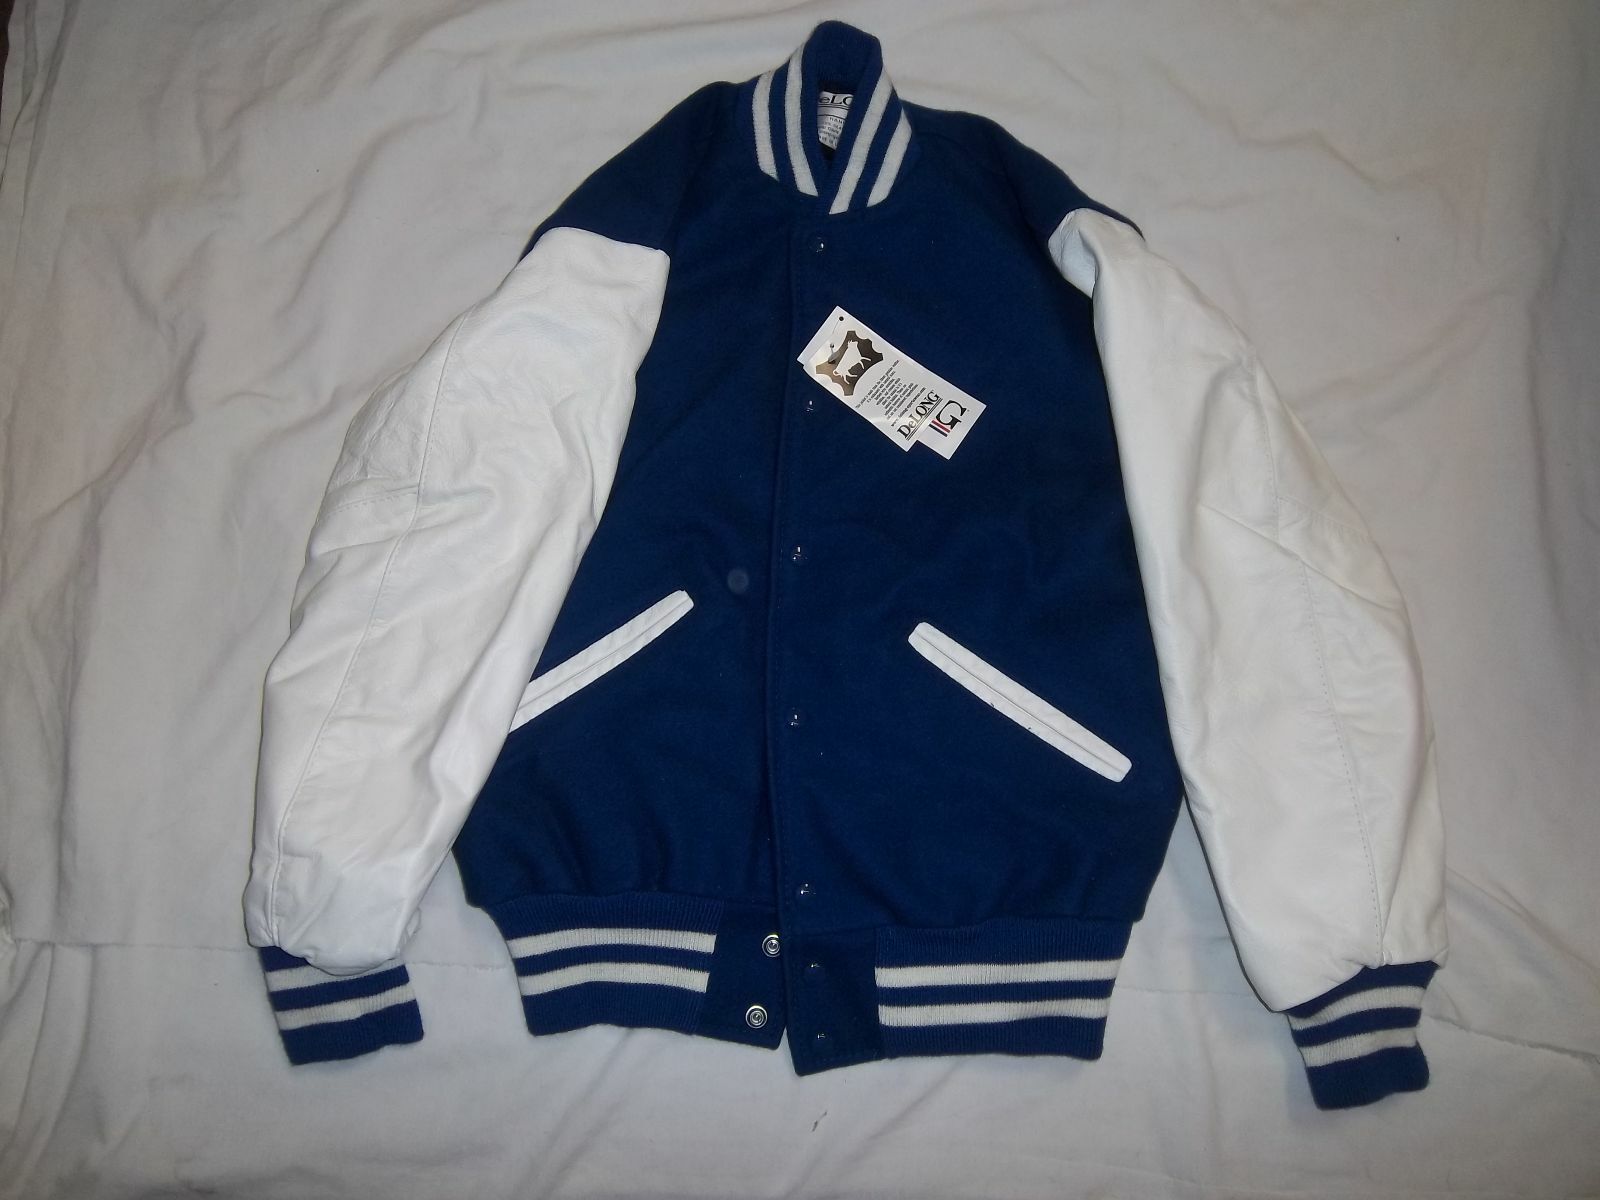 DELONG ADULT NAVY BLUE WITH TWO WHITE STRIPES QUILT LINED SCHOOL LETTER JACKET